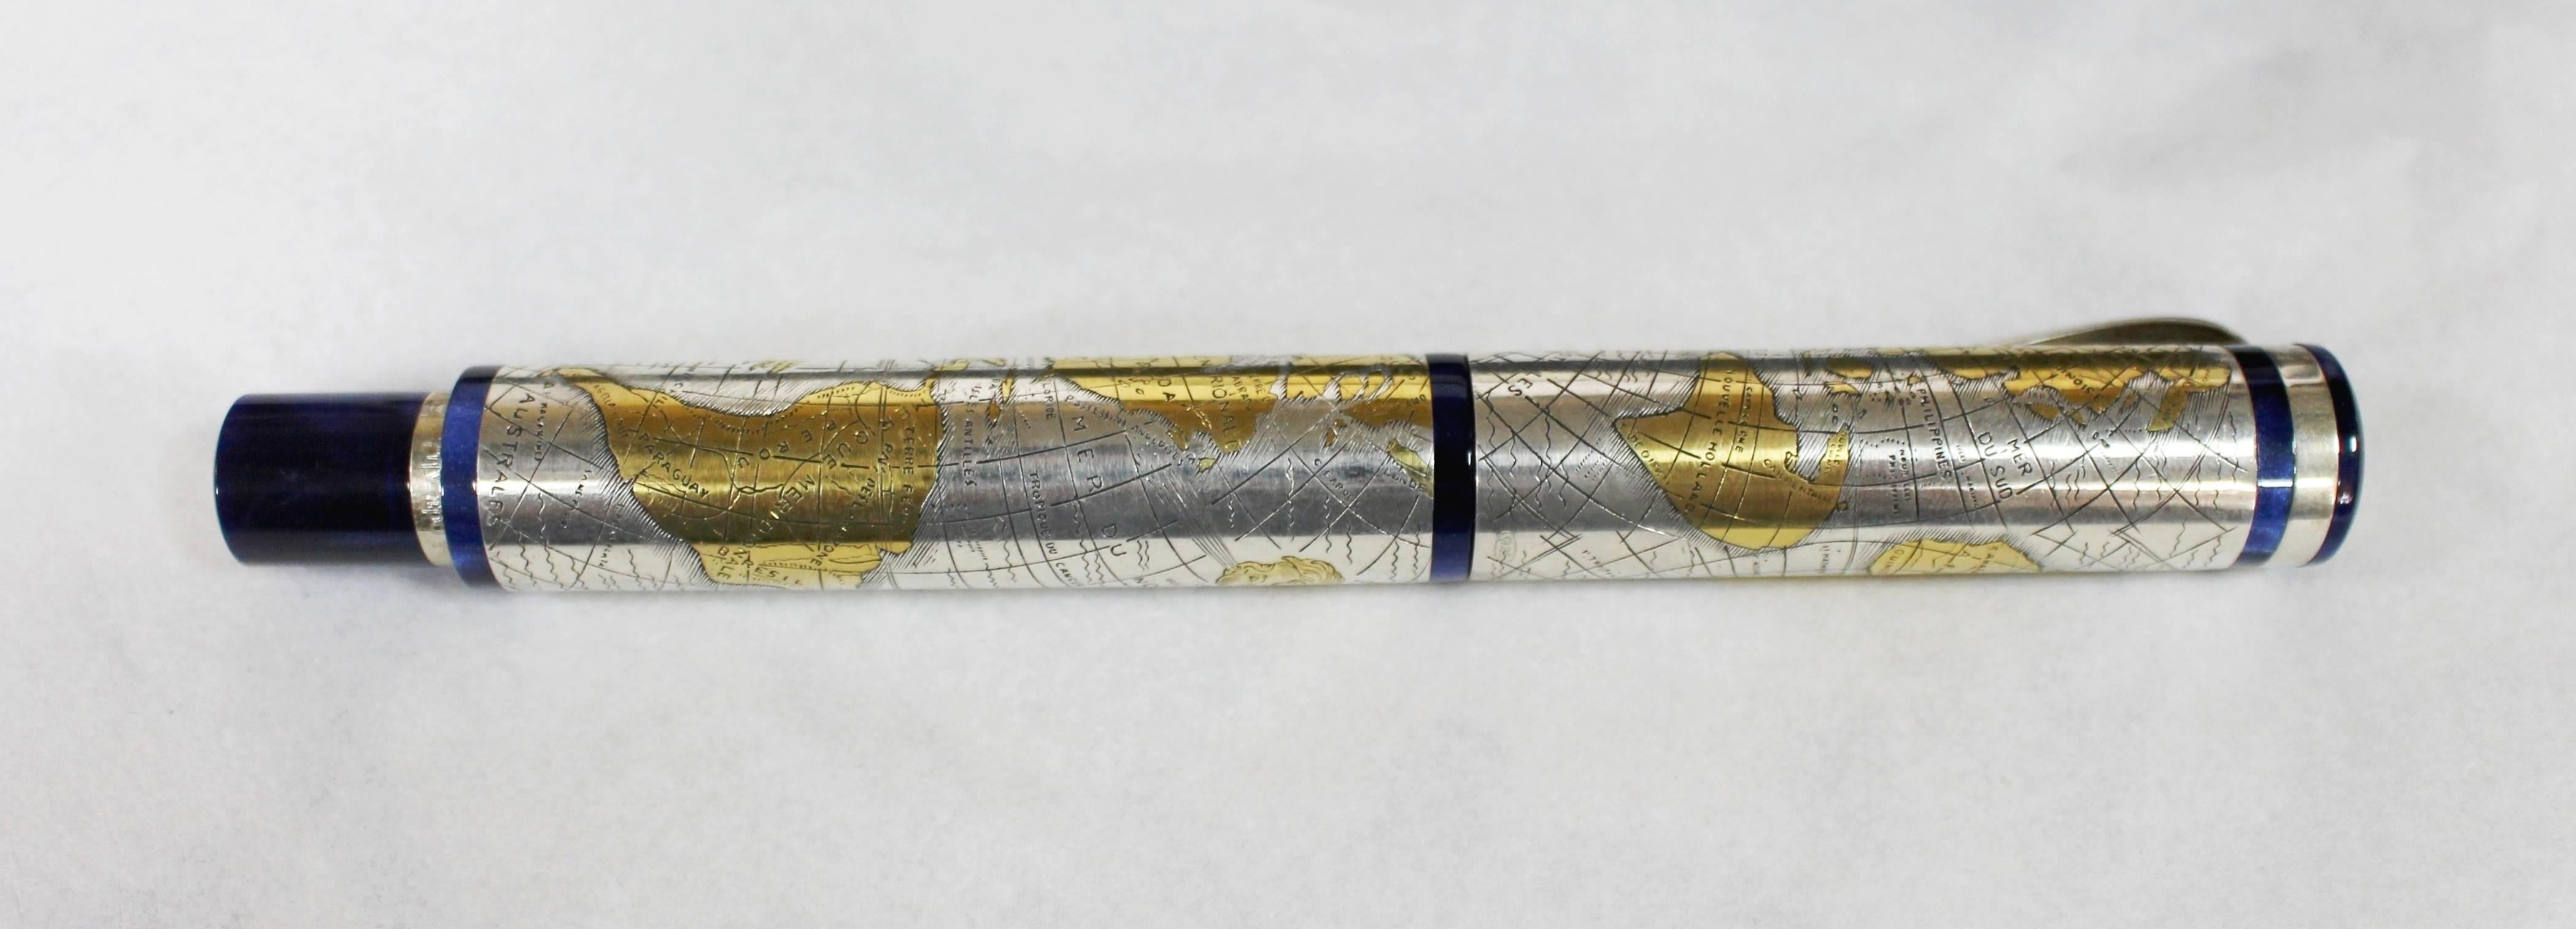 Maker Montegrappa, Italy
Edition Gea 2001 fountain pen
Ltd Edition 0147 of 2001
Design Piston fed fountain pen, made in Italy. Sterling silver with 24-karat gold foil application. Etched partially platinum plated 18-karat gold nib with an ebonite